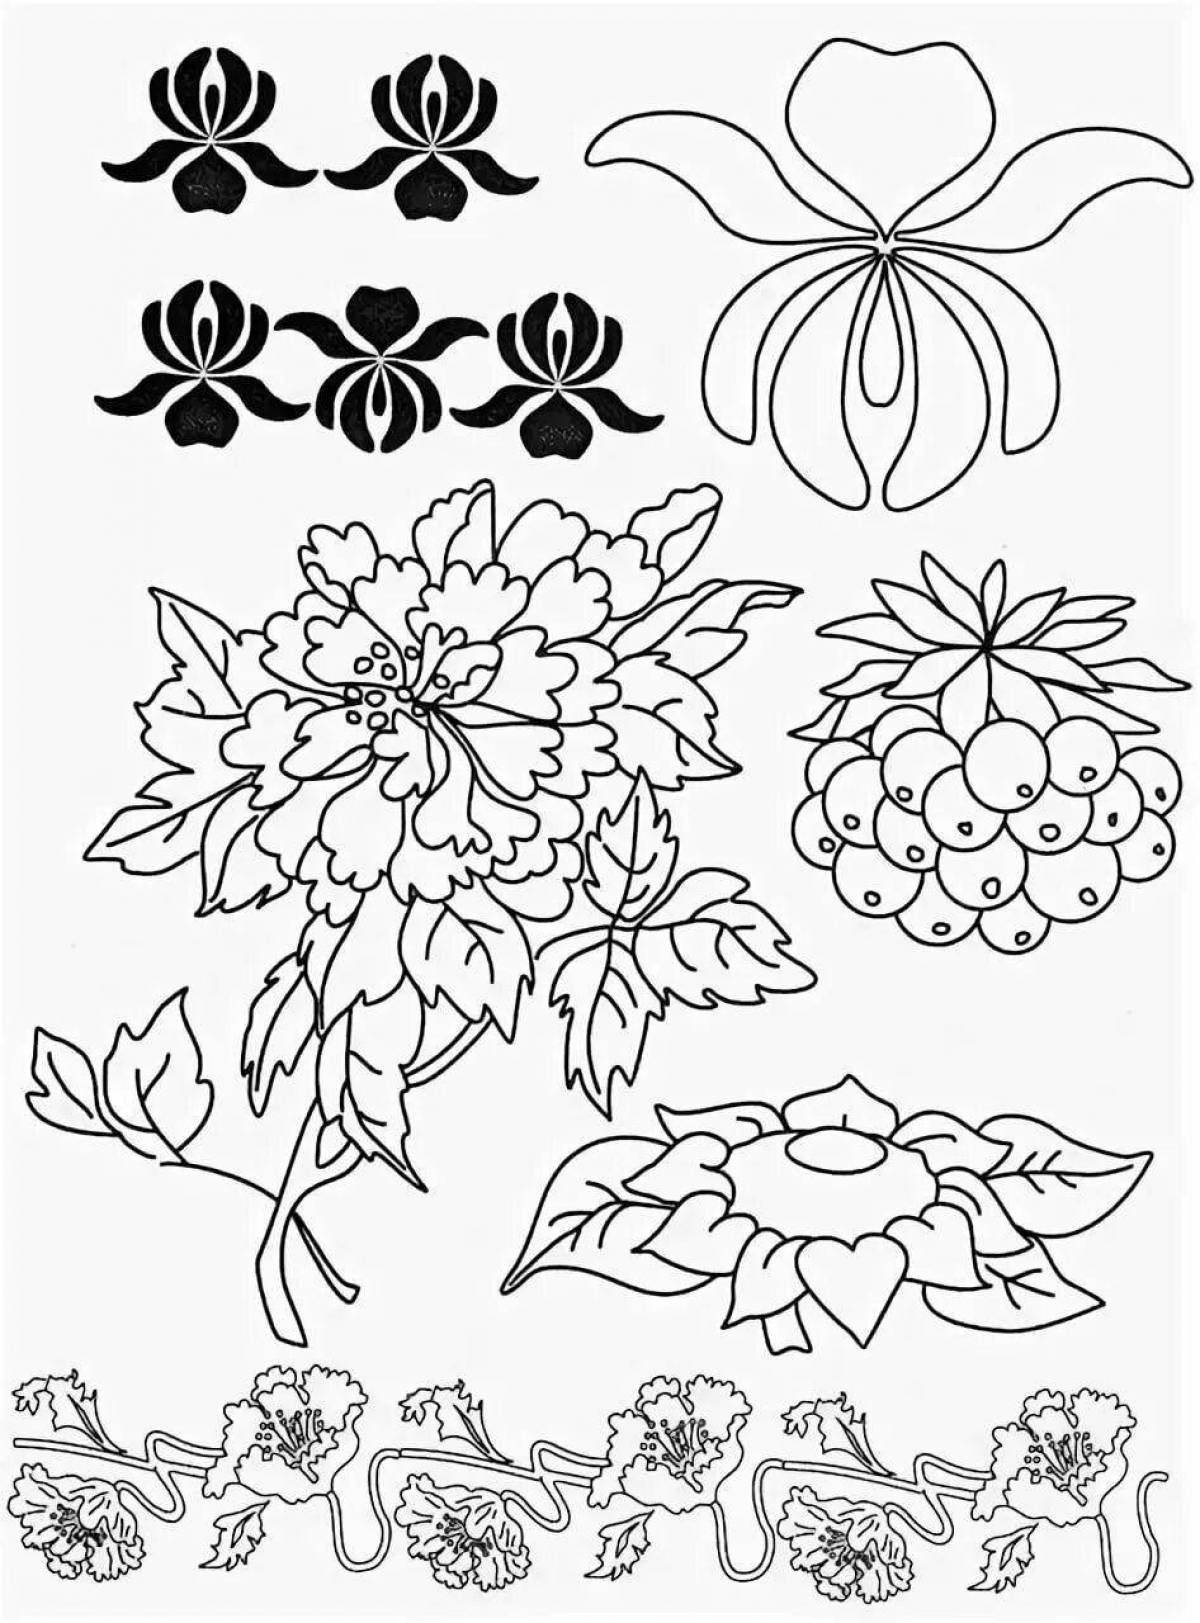 Coloring page charming flower ornament